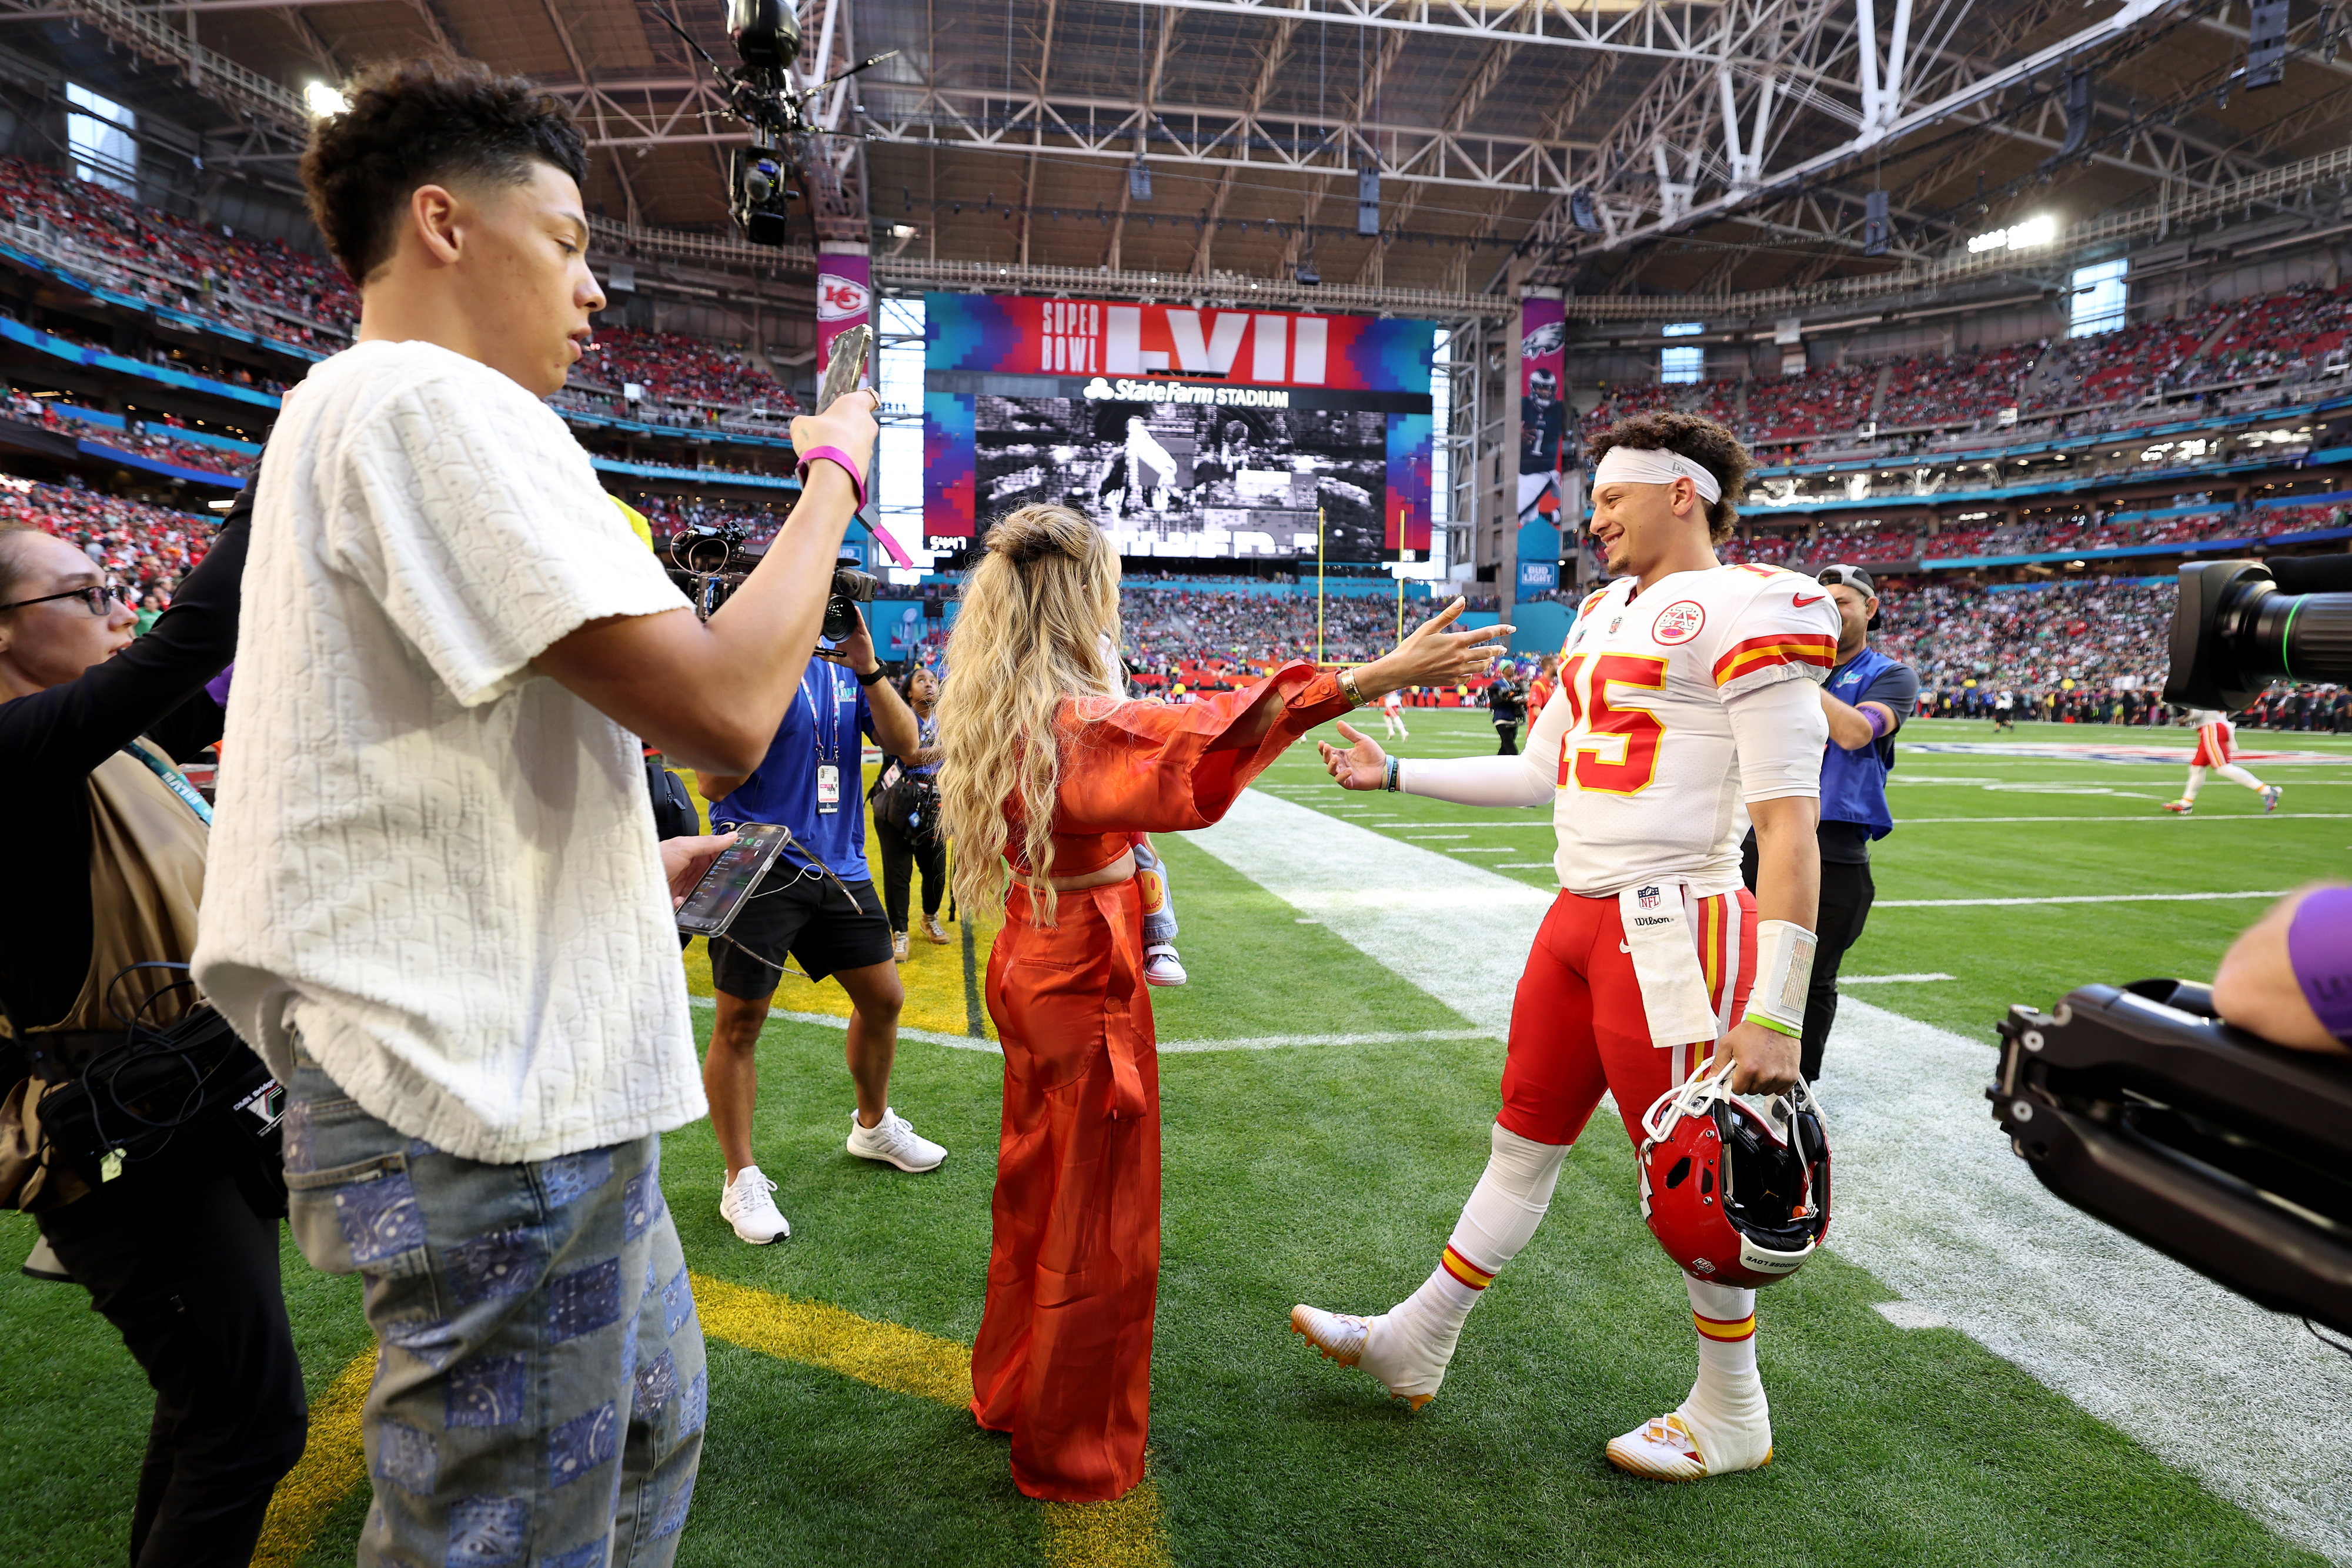 Jackson, Brittany, and Patrick Mahomes on the field